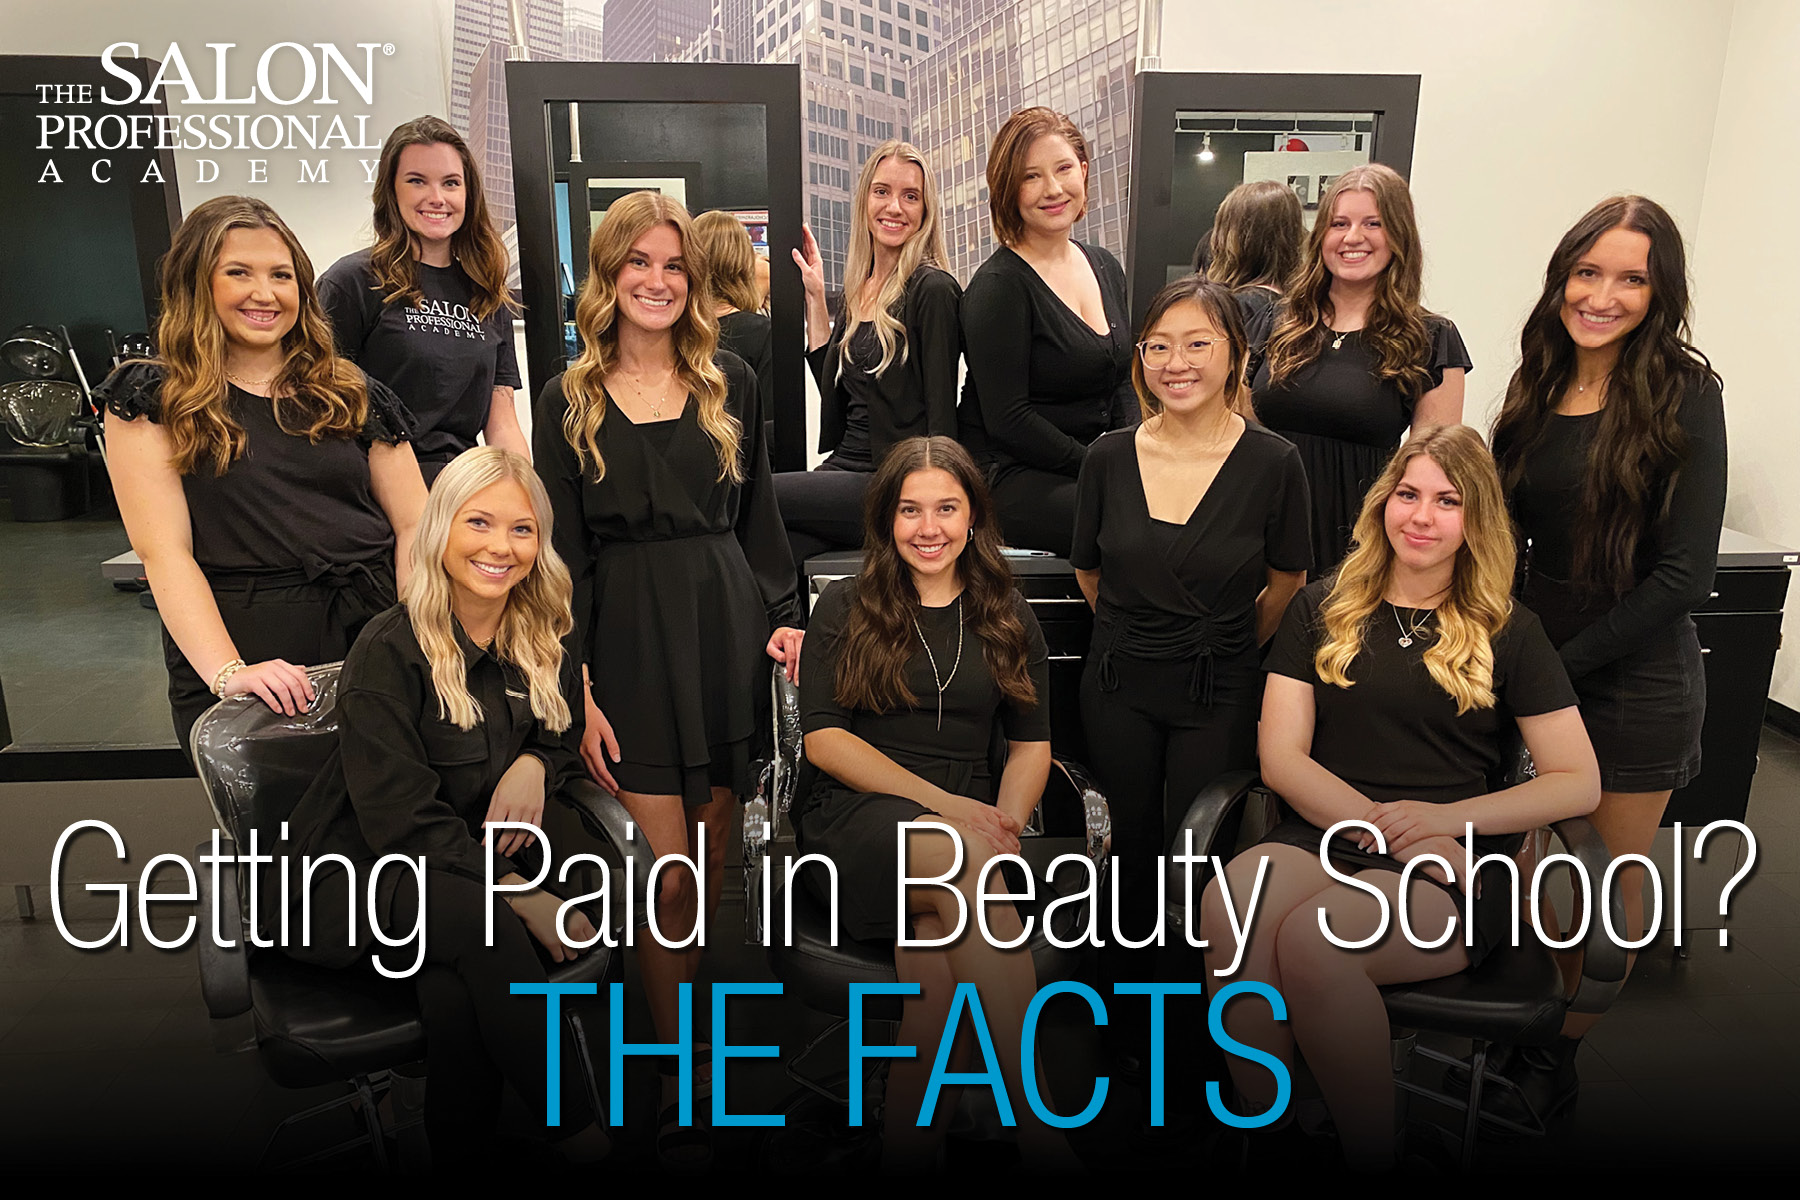 How Much Do You Get Paid During Cosmetology School Training in Evansville? Most Folks Don't Have Financial Reserves to Place Bills on Hold. But There Are Great Ways To Save. Read on For Your Guide